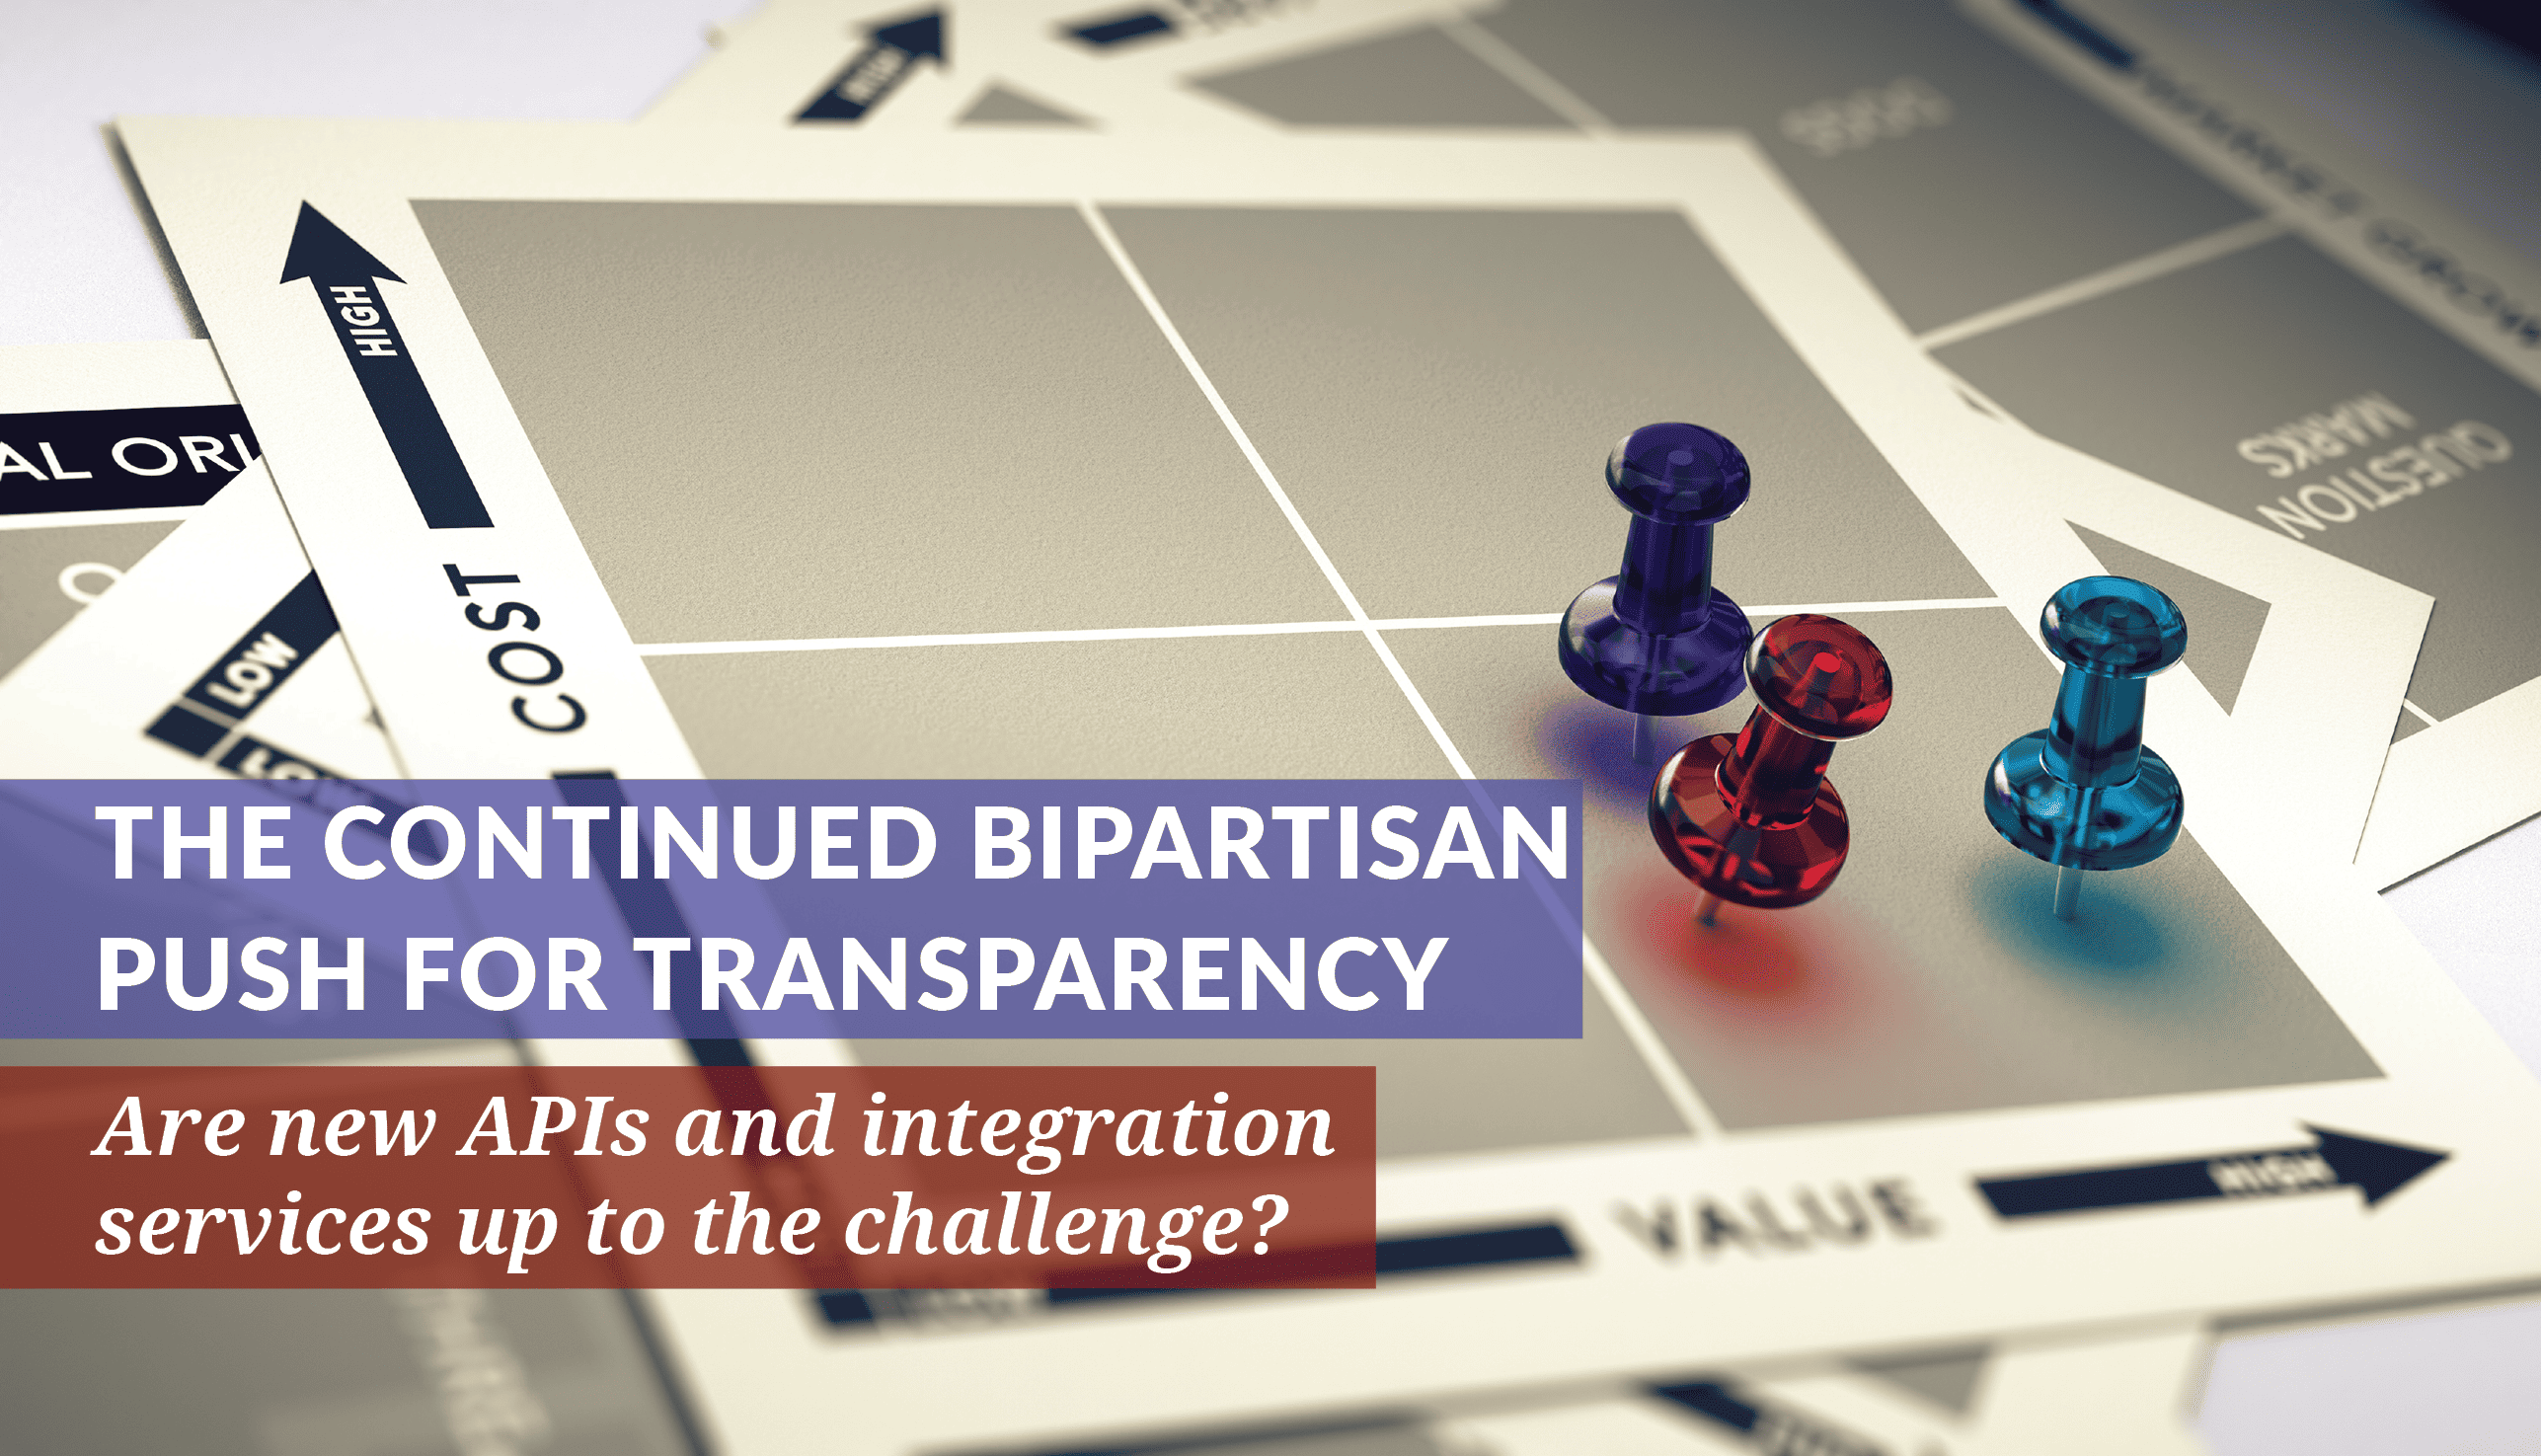 The Continued Bipartisan Push for Transparency